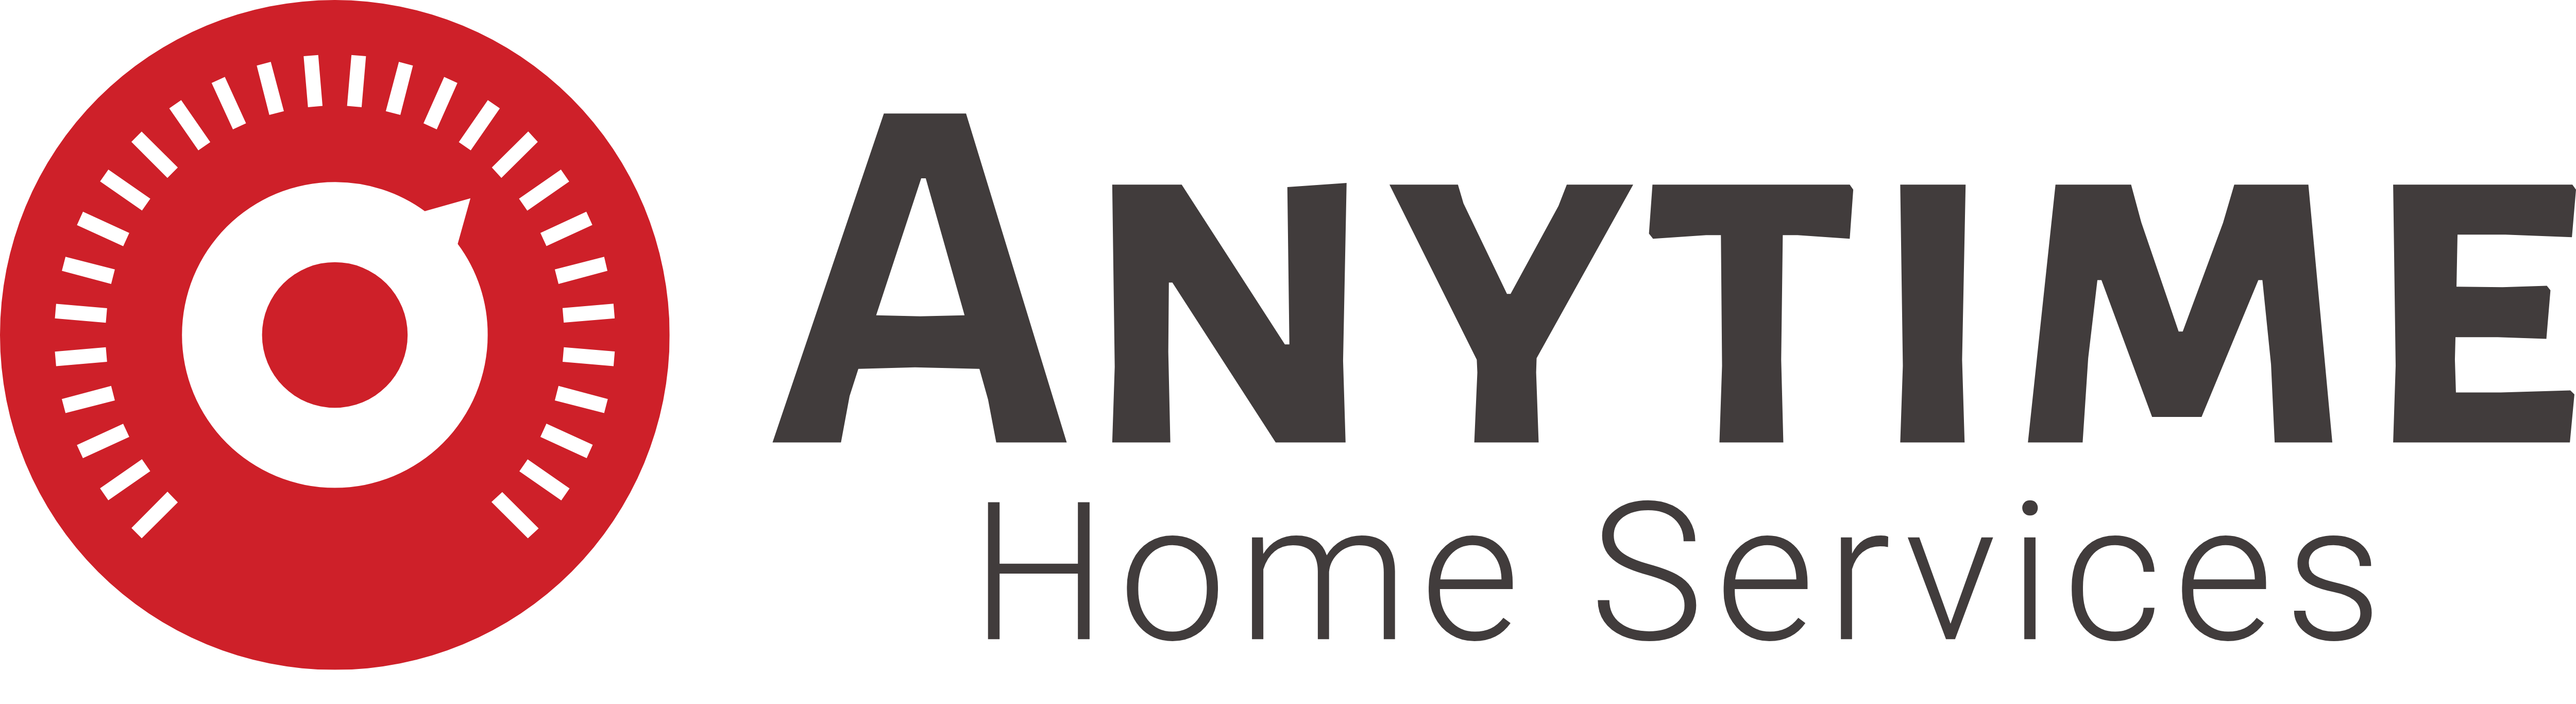 Contact Us – Anytime Home Services